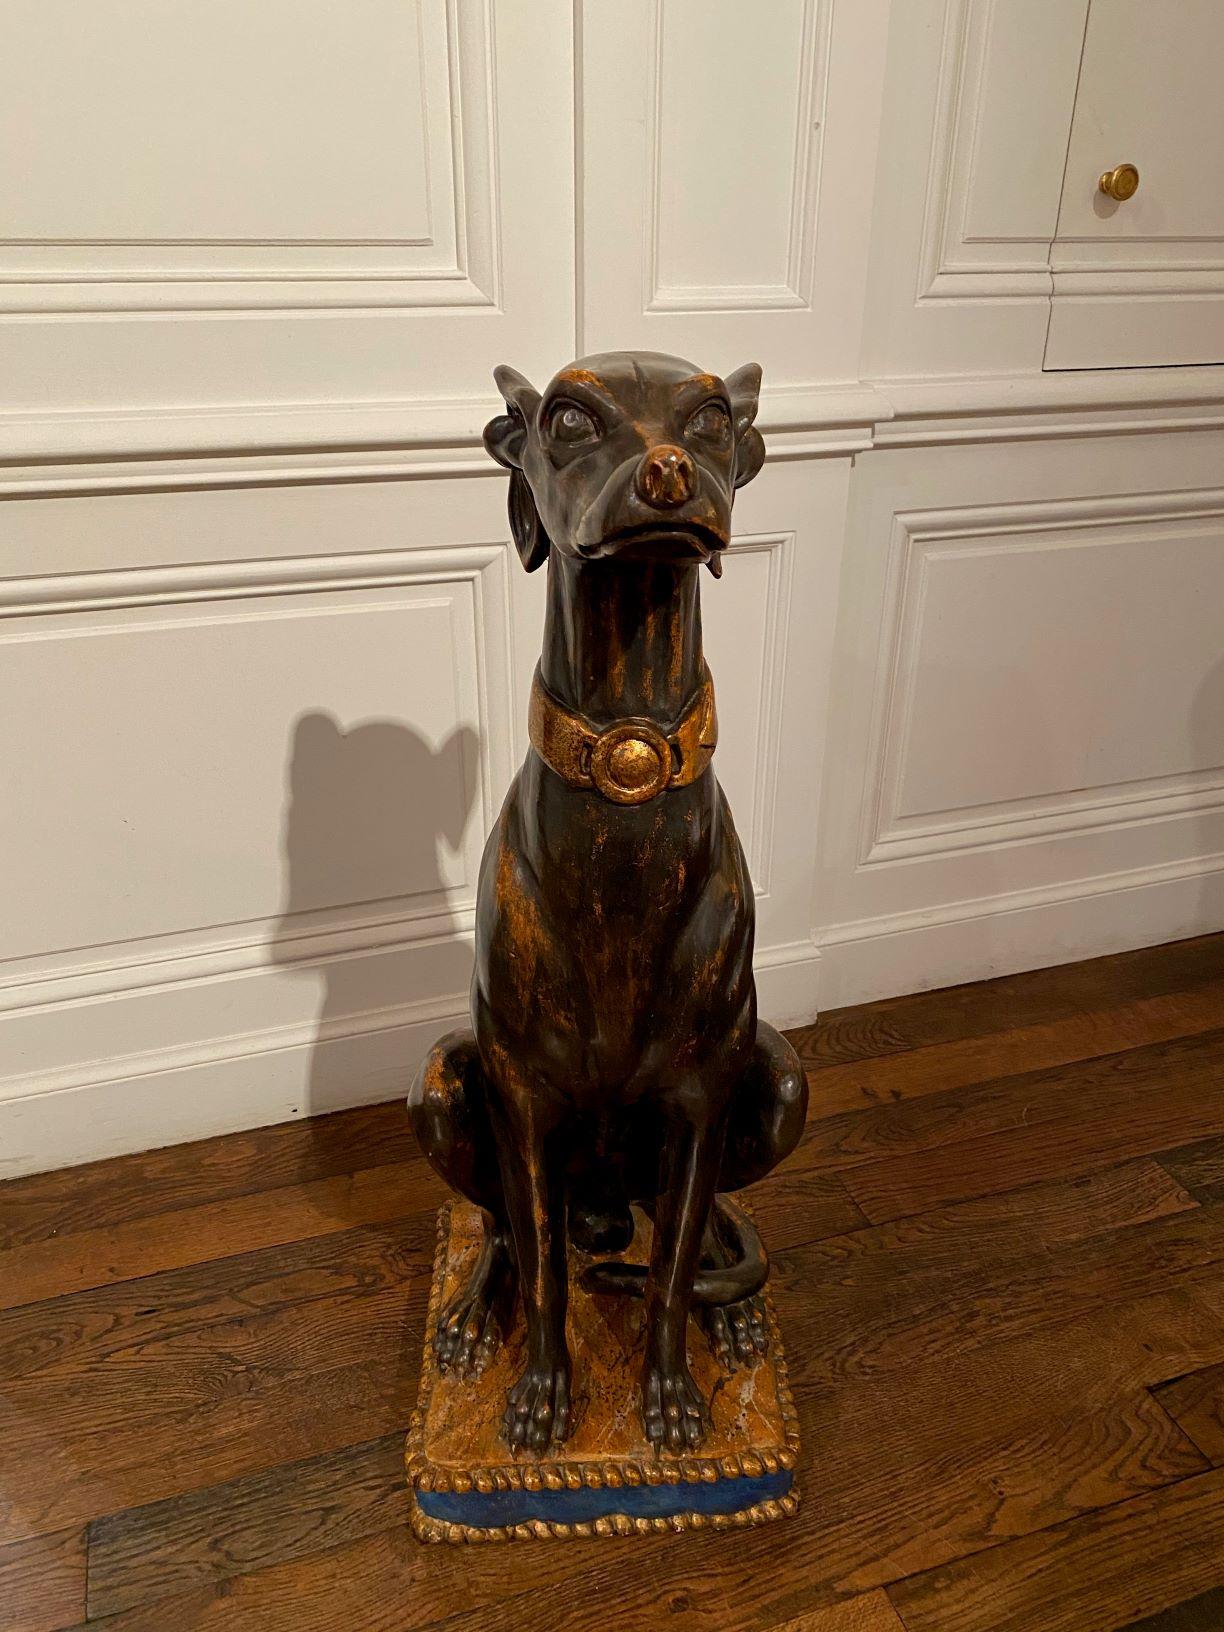 A tall Italian carved polychrome and gilt wood model of a greyhound seated on a cushion.

Italy, 19th century

Dimensions : H. 83 cm – W. 32 cm – D. 29 cm (32 5/8 – 12 9/16 x 11 7/16 in)

The greyhound sculpture from the 19th century features